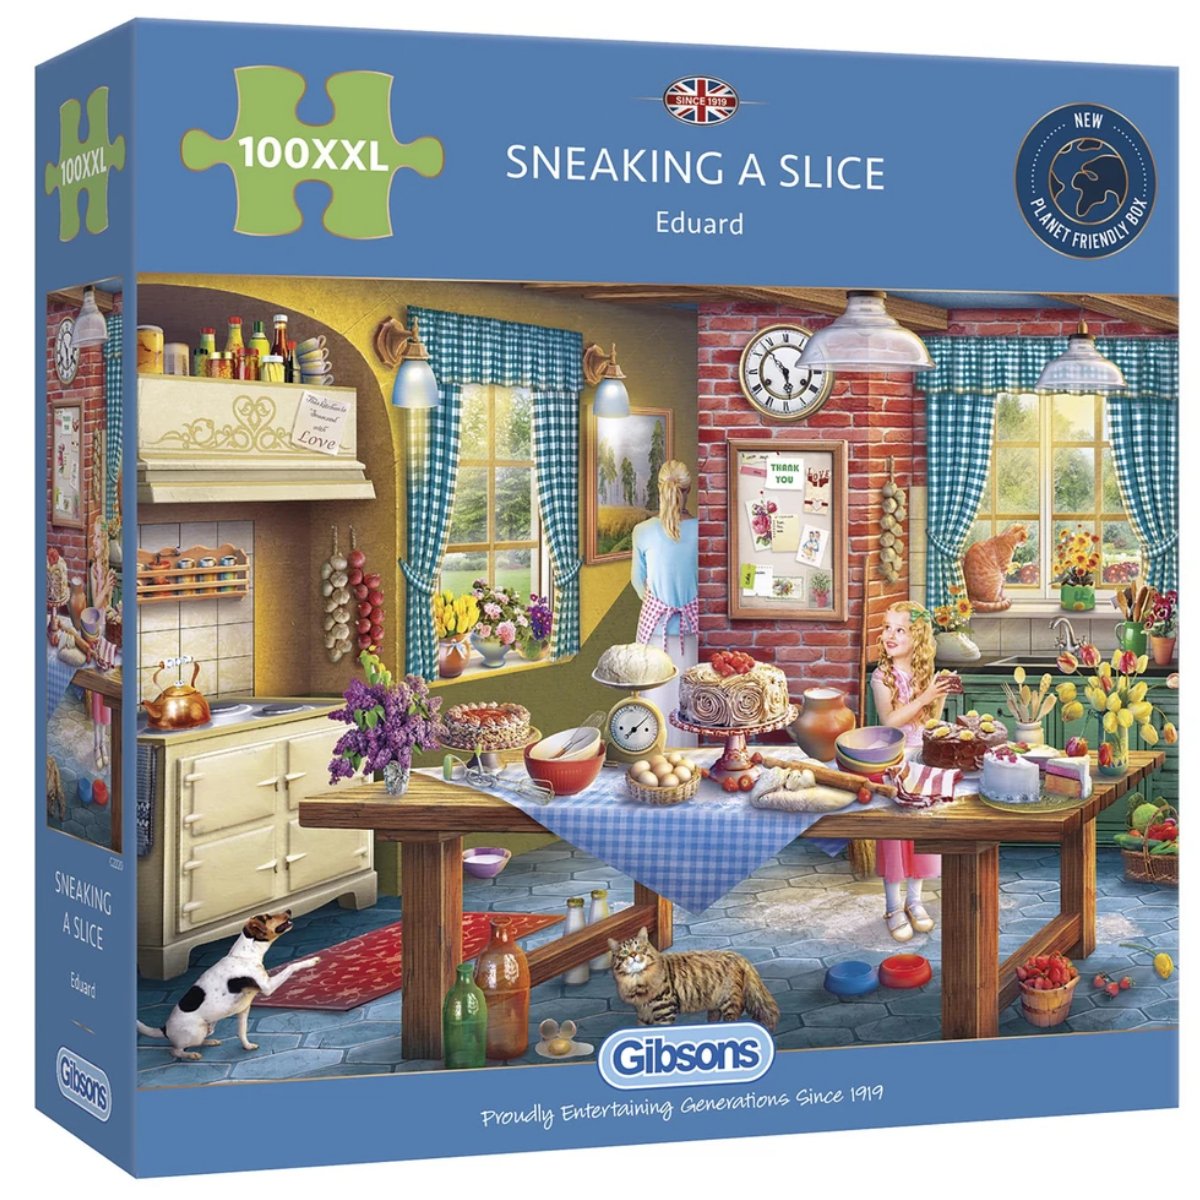 Gibsons Sneaking a Slice Jigsaw Puzzle (100 XXL Pieces)